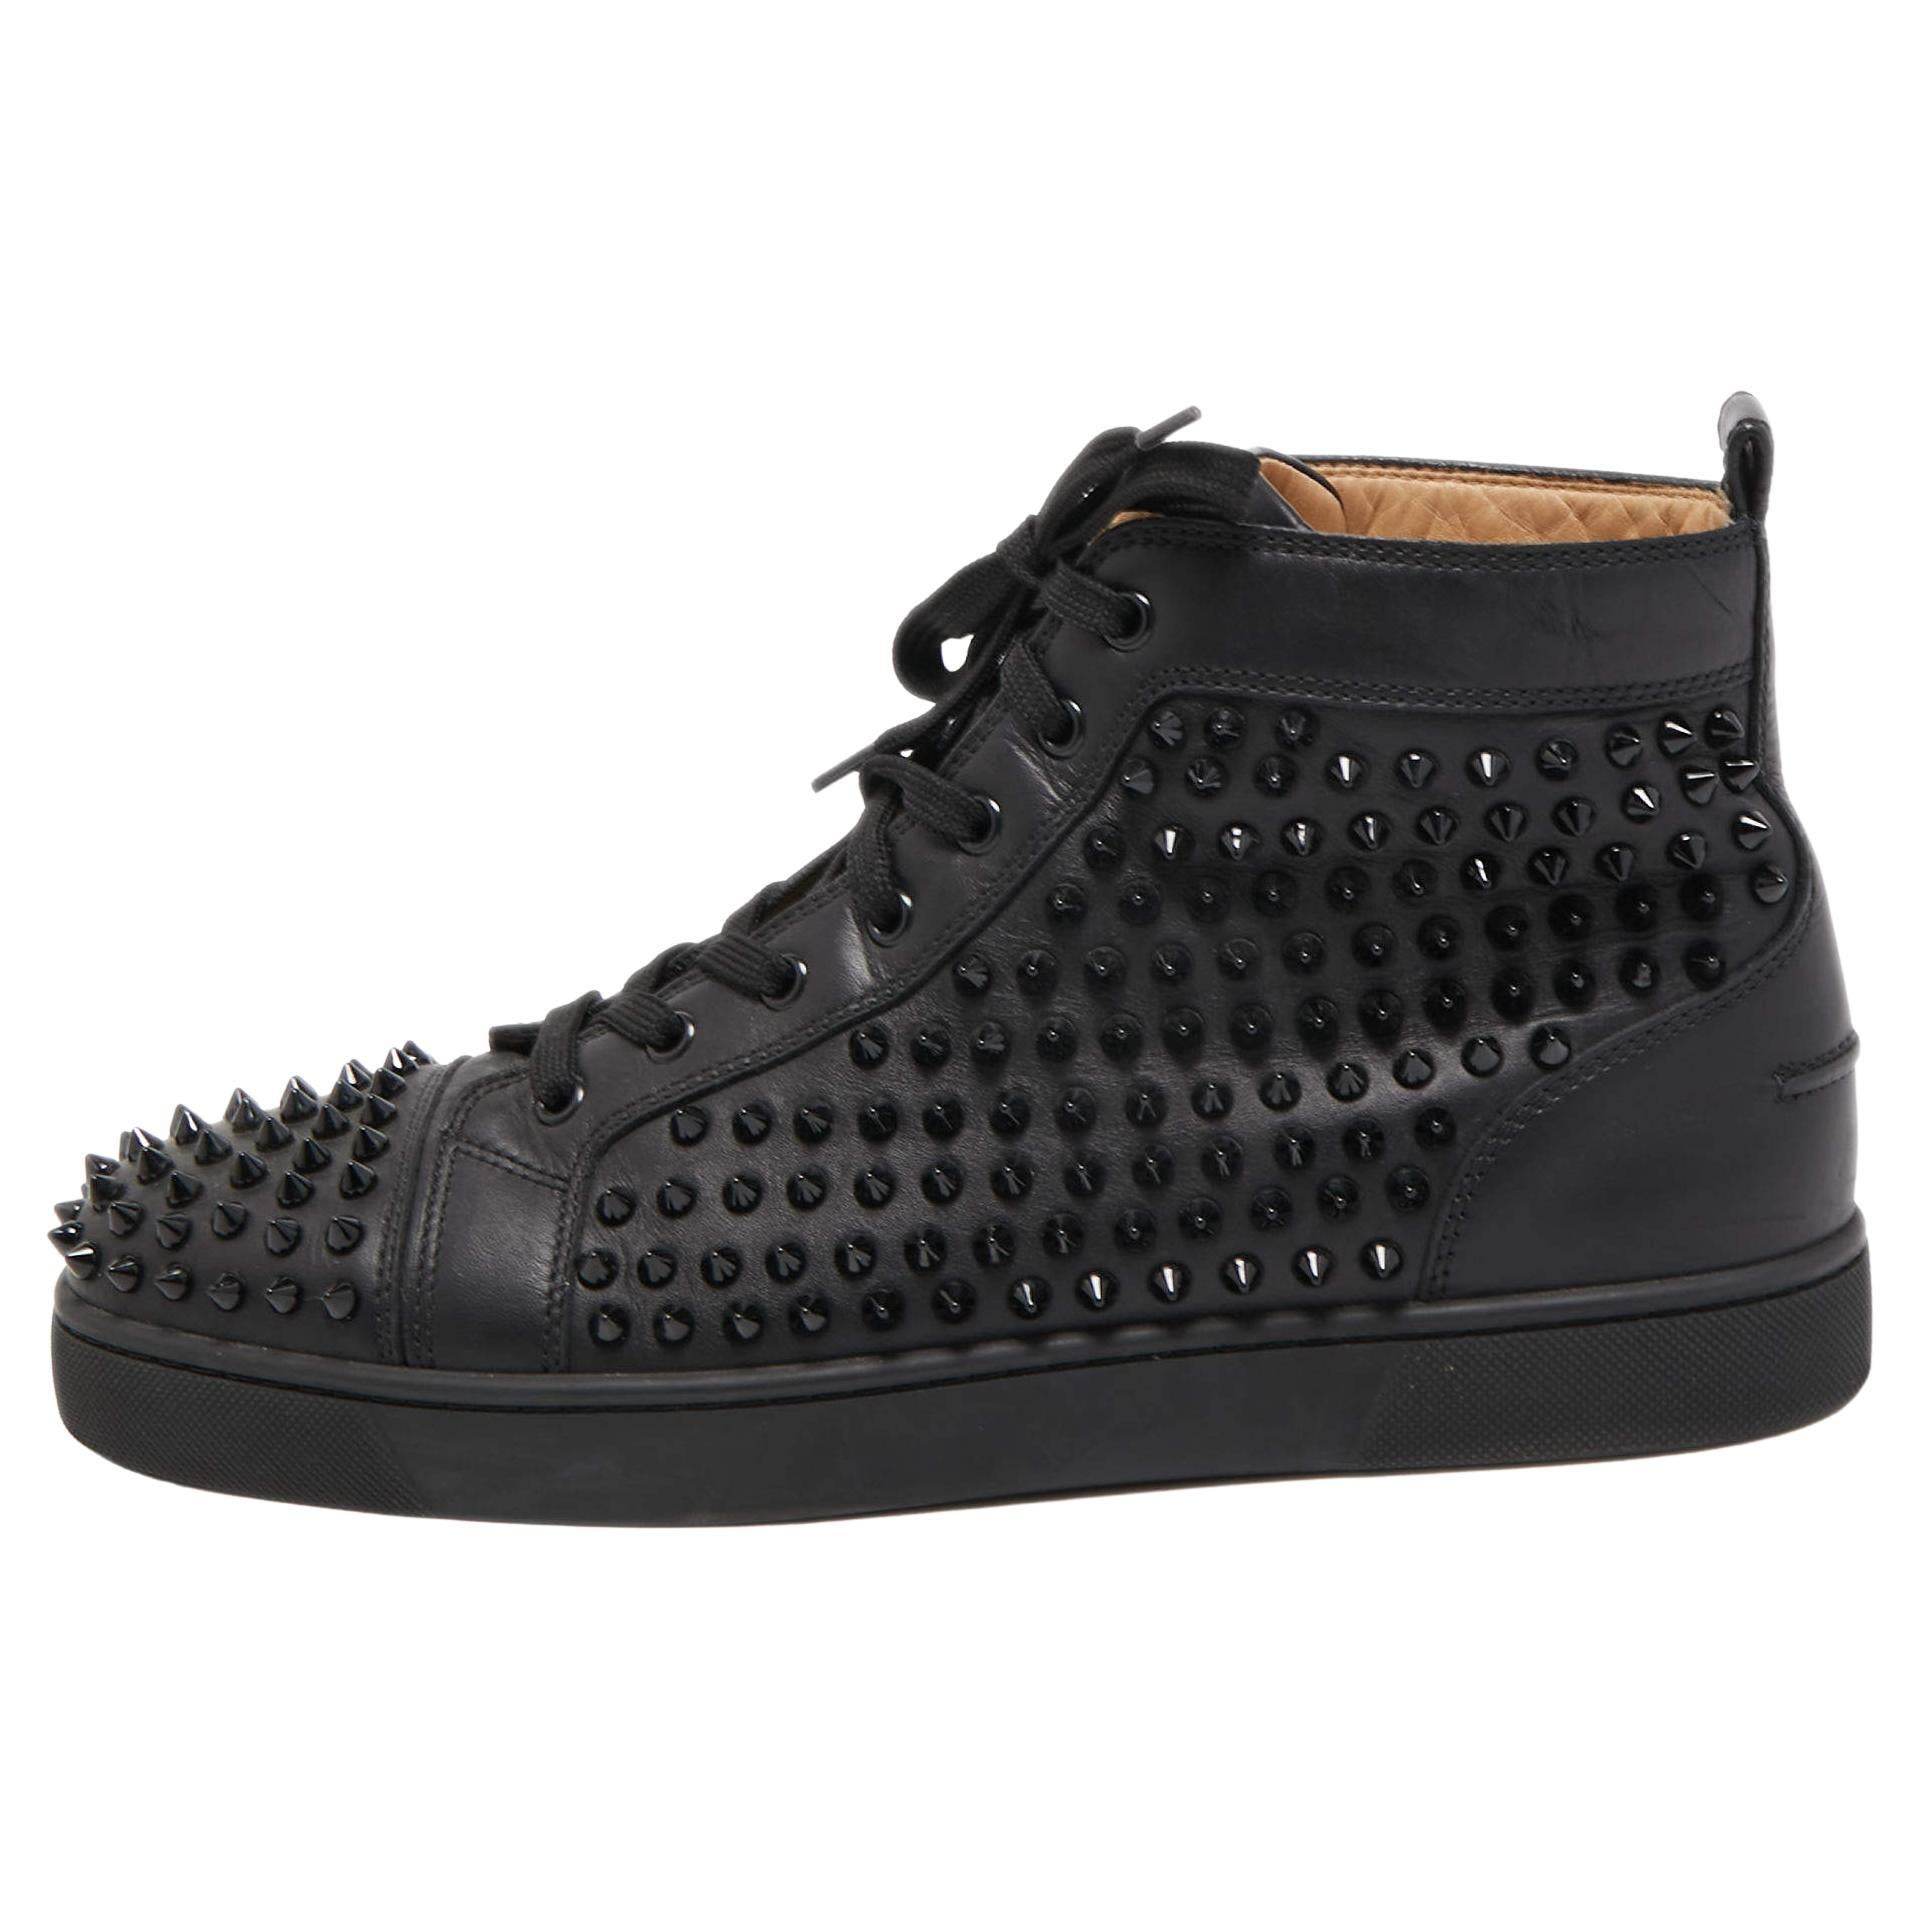 Christian Louboutin Silver Leather Louis Spikes High-Top Sneakers Size 44  Christian Louboutin | The Luxury Closet